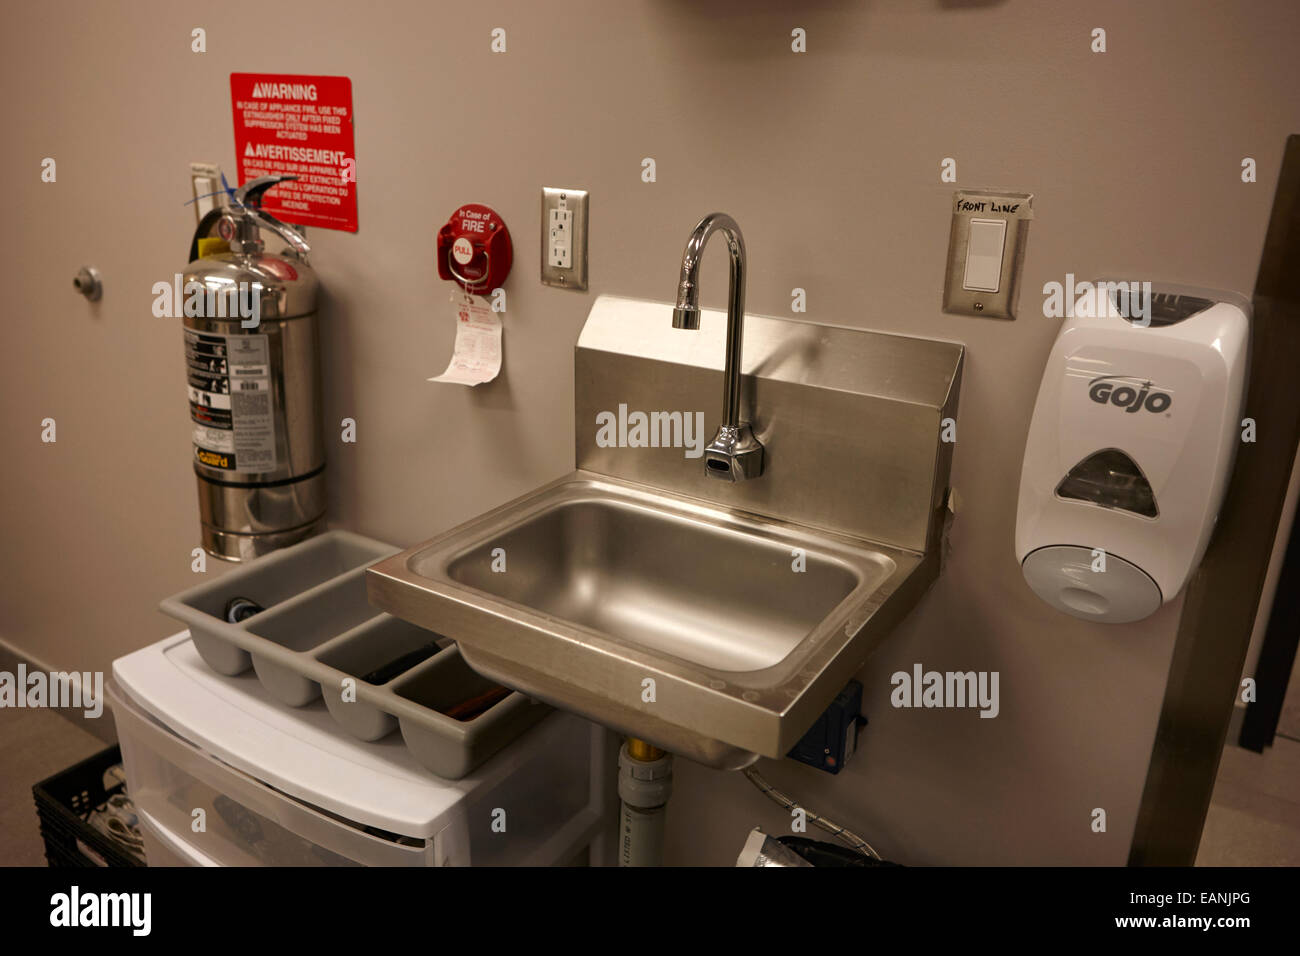 Safe Hygenic Hand Washing Sink In A Commercial Kitchen In